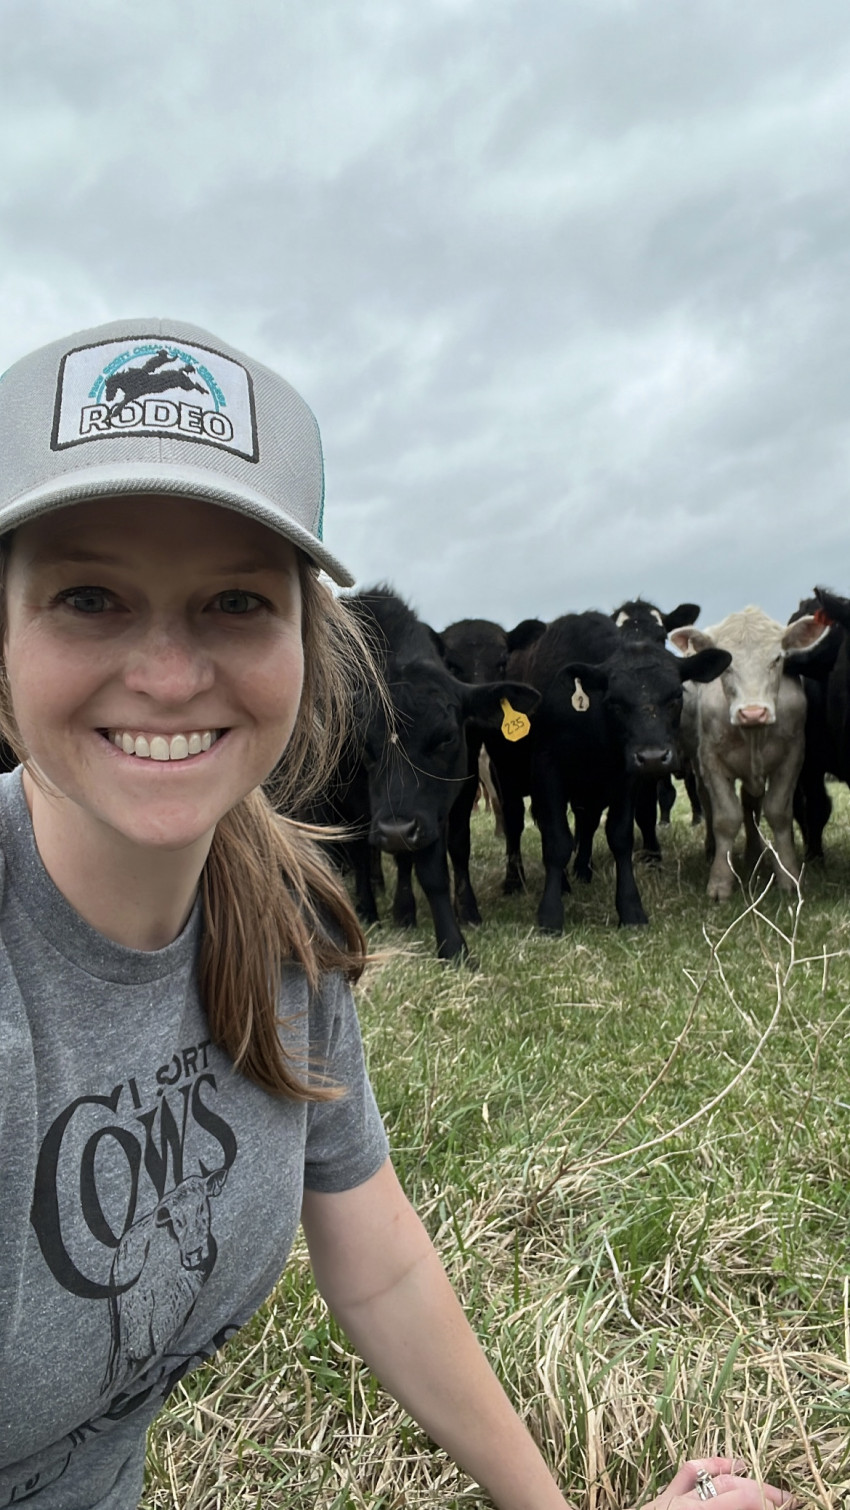 brandi with cattle in background